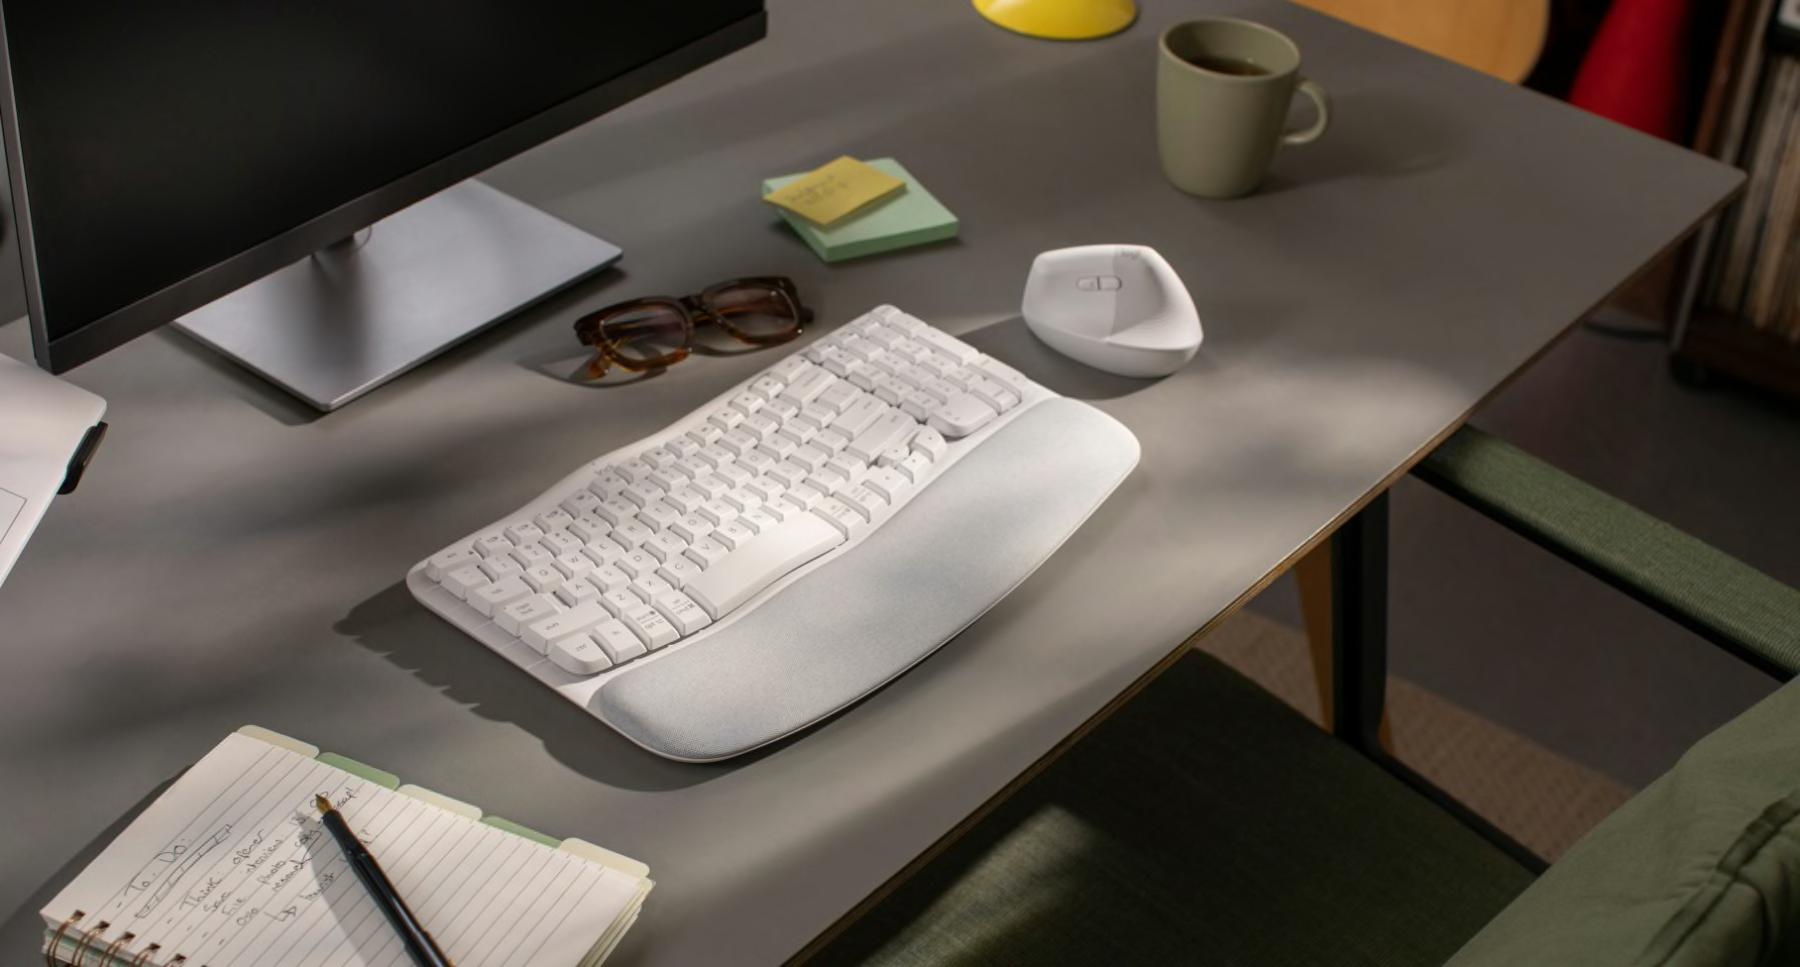 Wave Keys keyboard and Lift Ergonomic mouse in Off White color